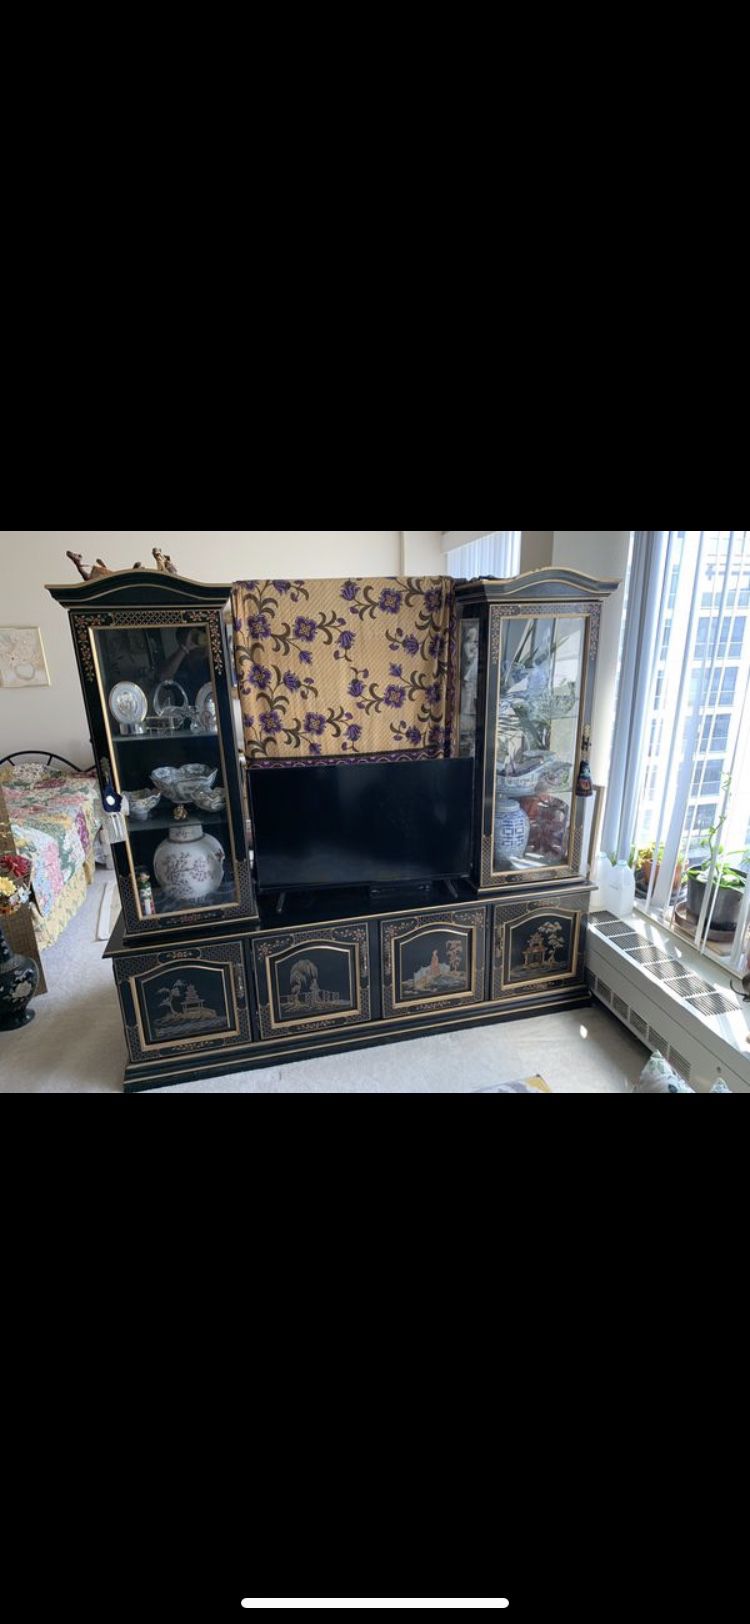 NICE CHINA CABINET CONSOLE TV STAND.